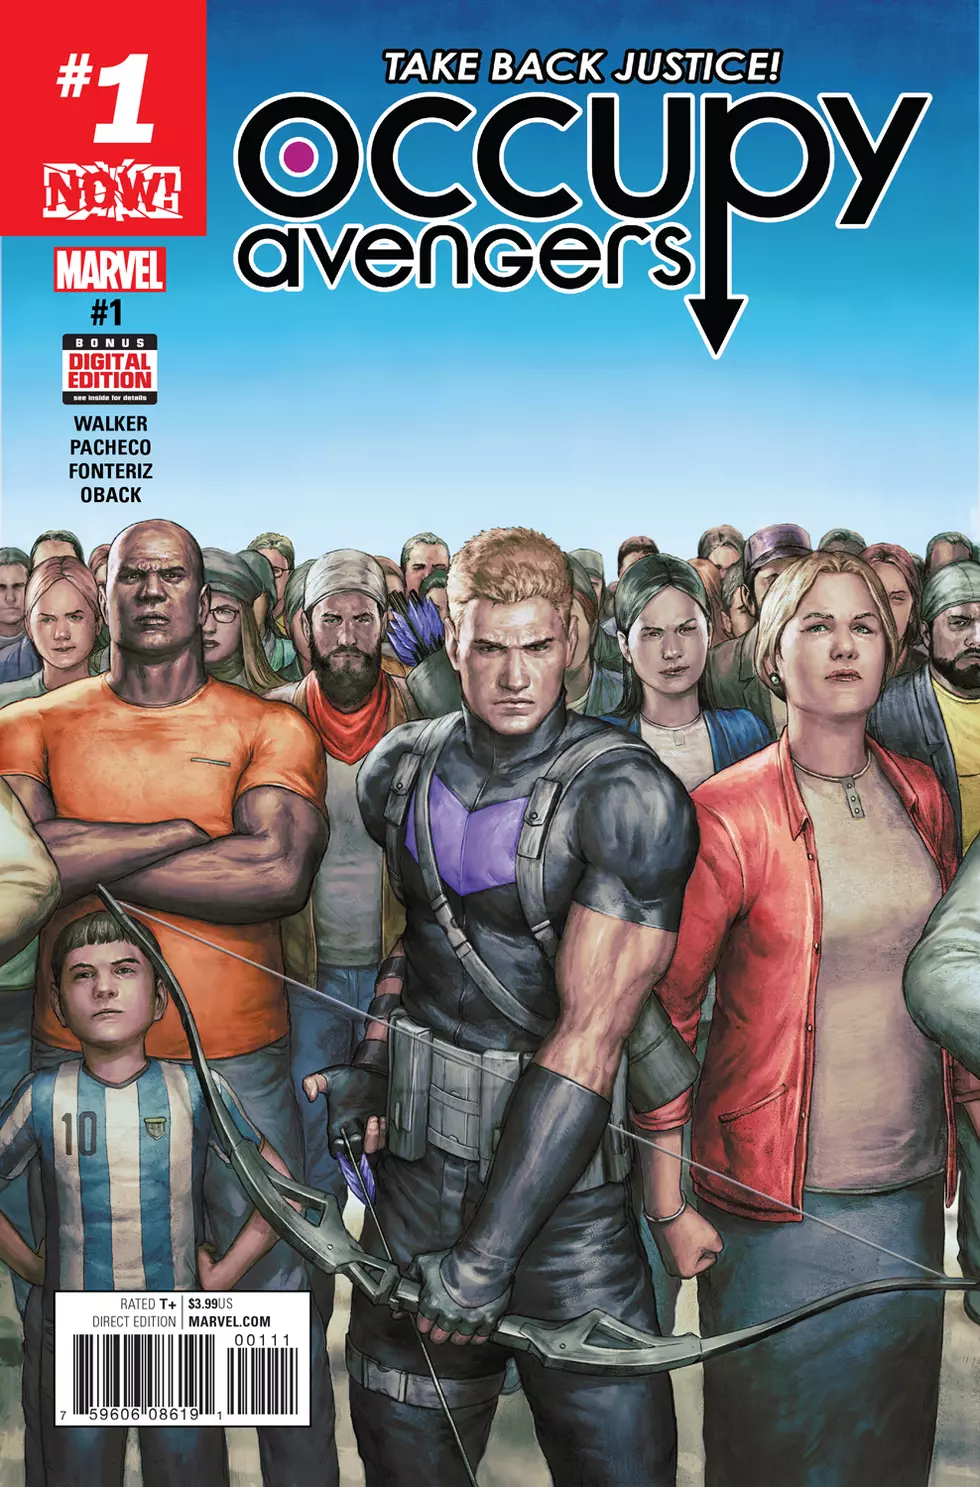 Clint Barton Starts From The Bottom In Occupy Avengers 1